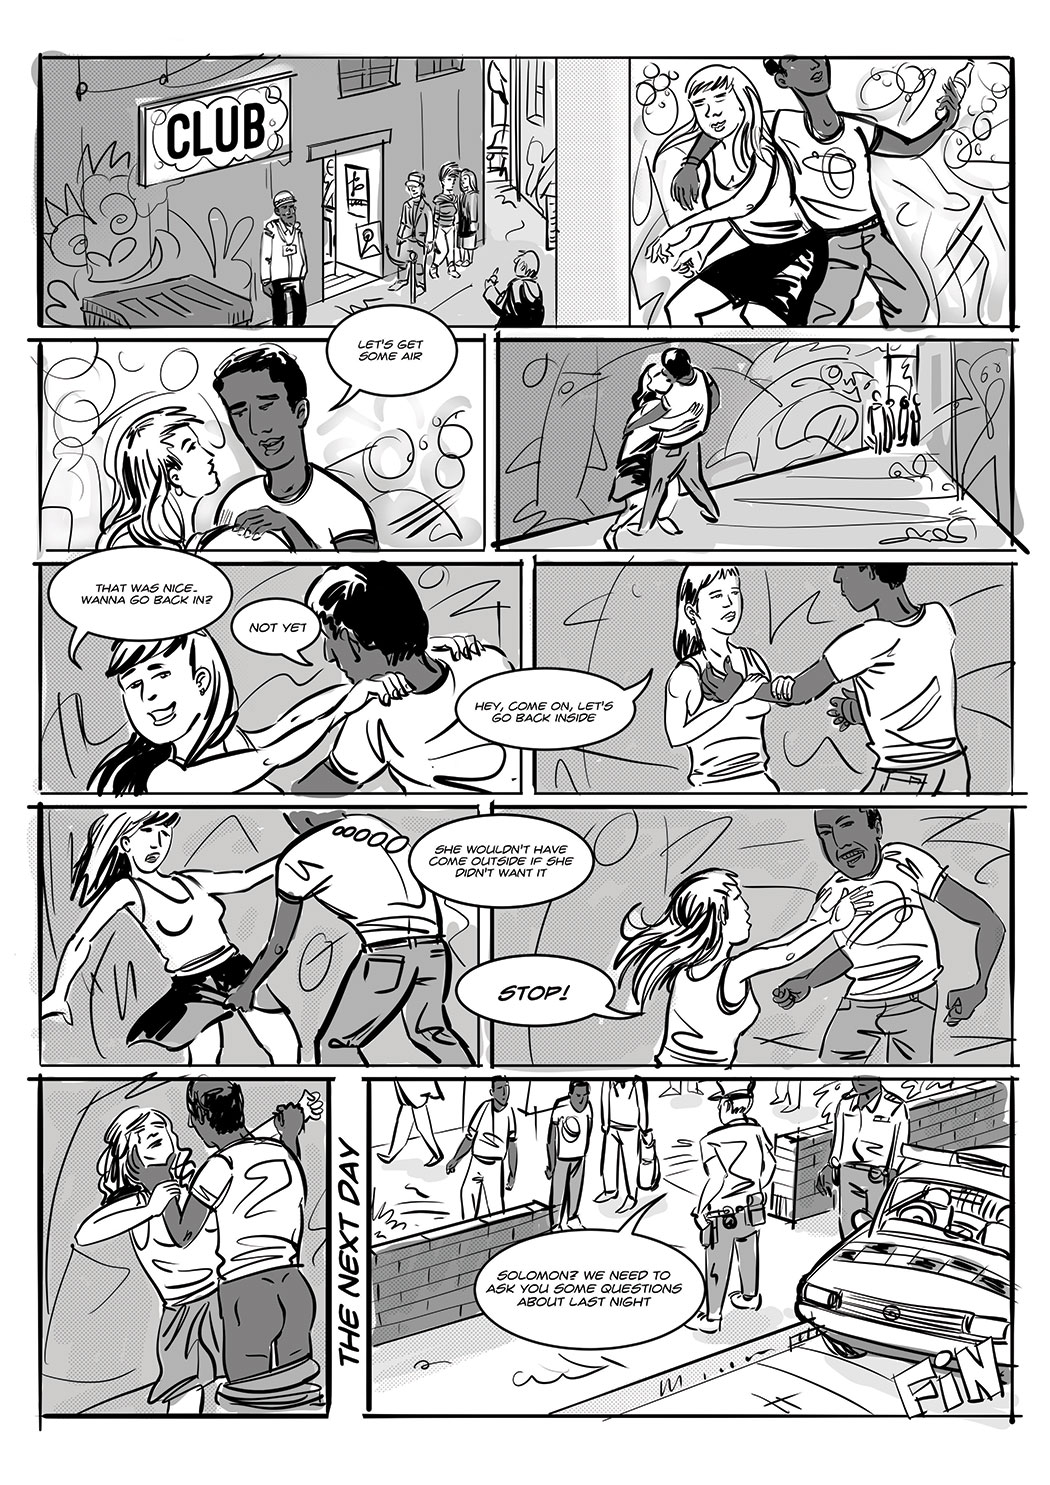 A comic showing a club scene and Solomon sexually assaulting Sally in the lane